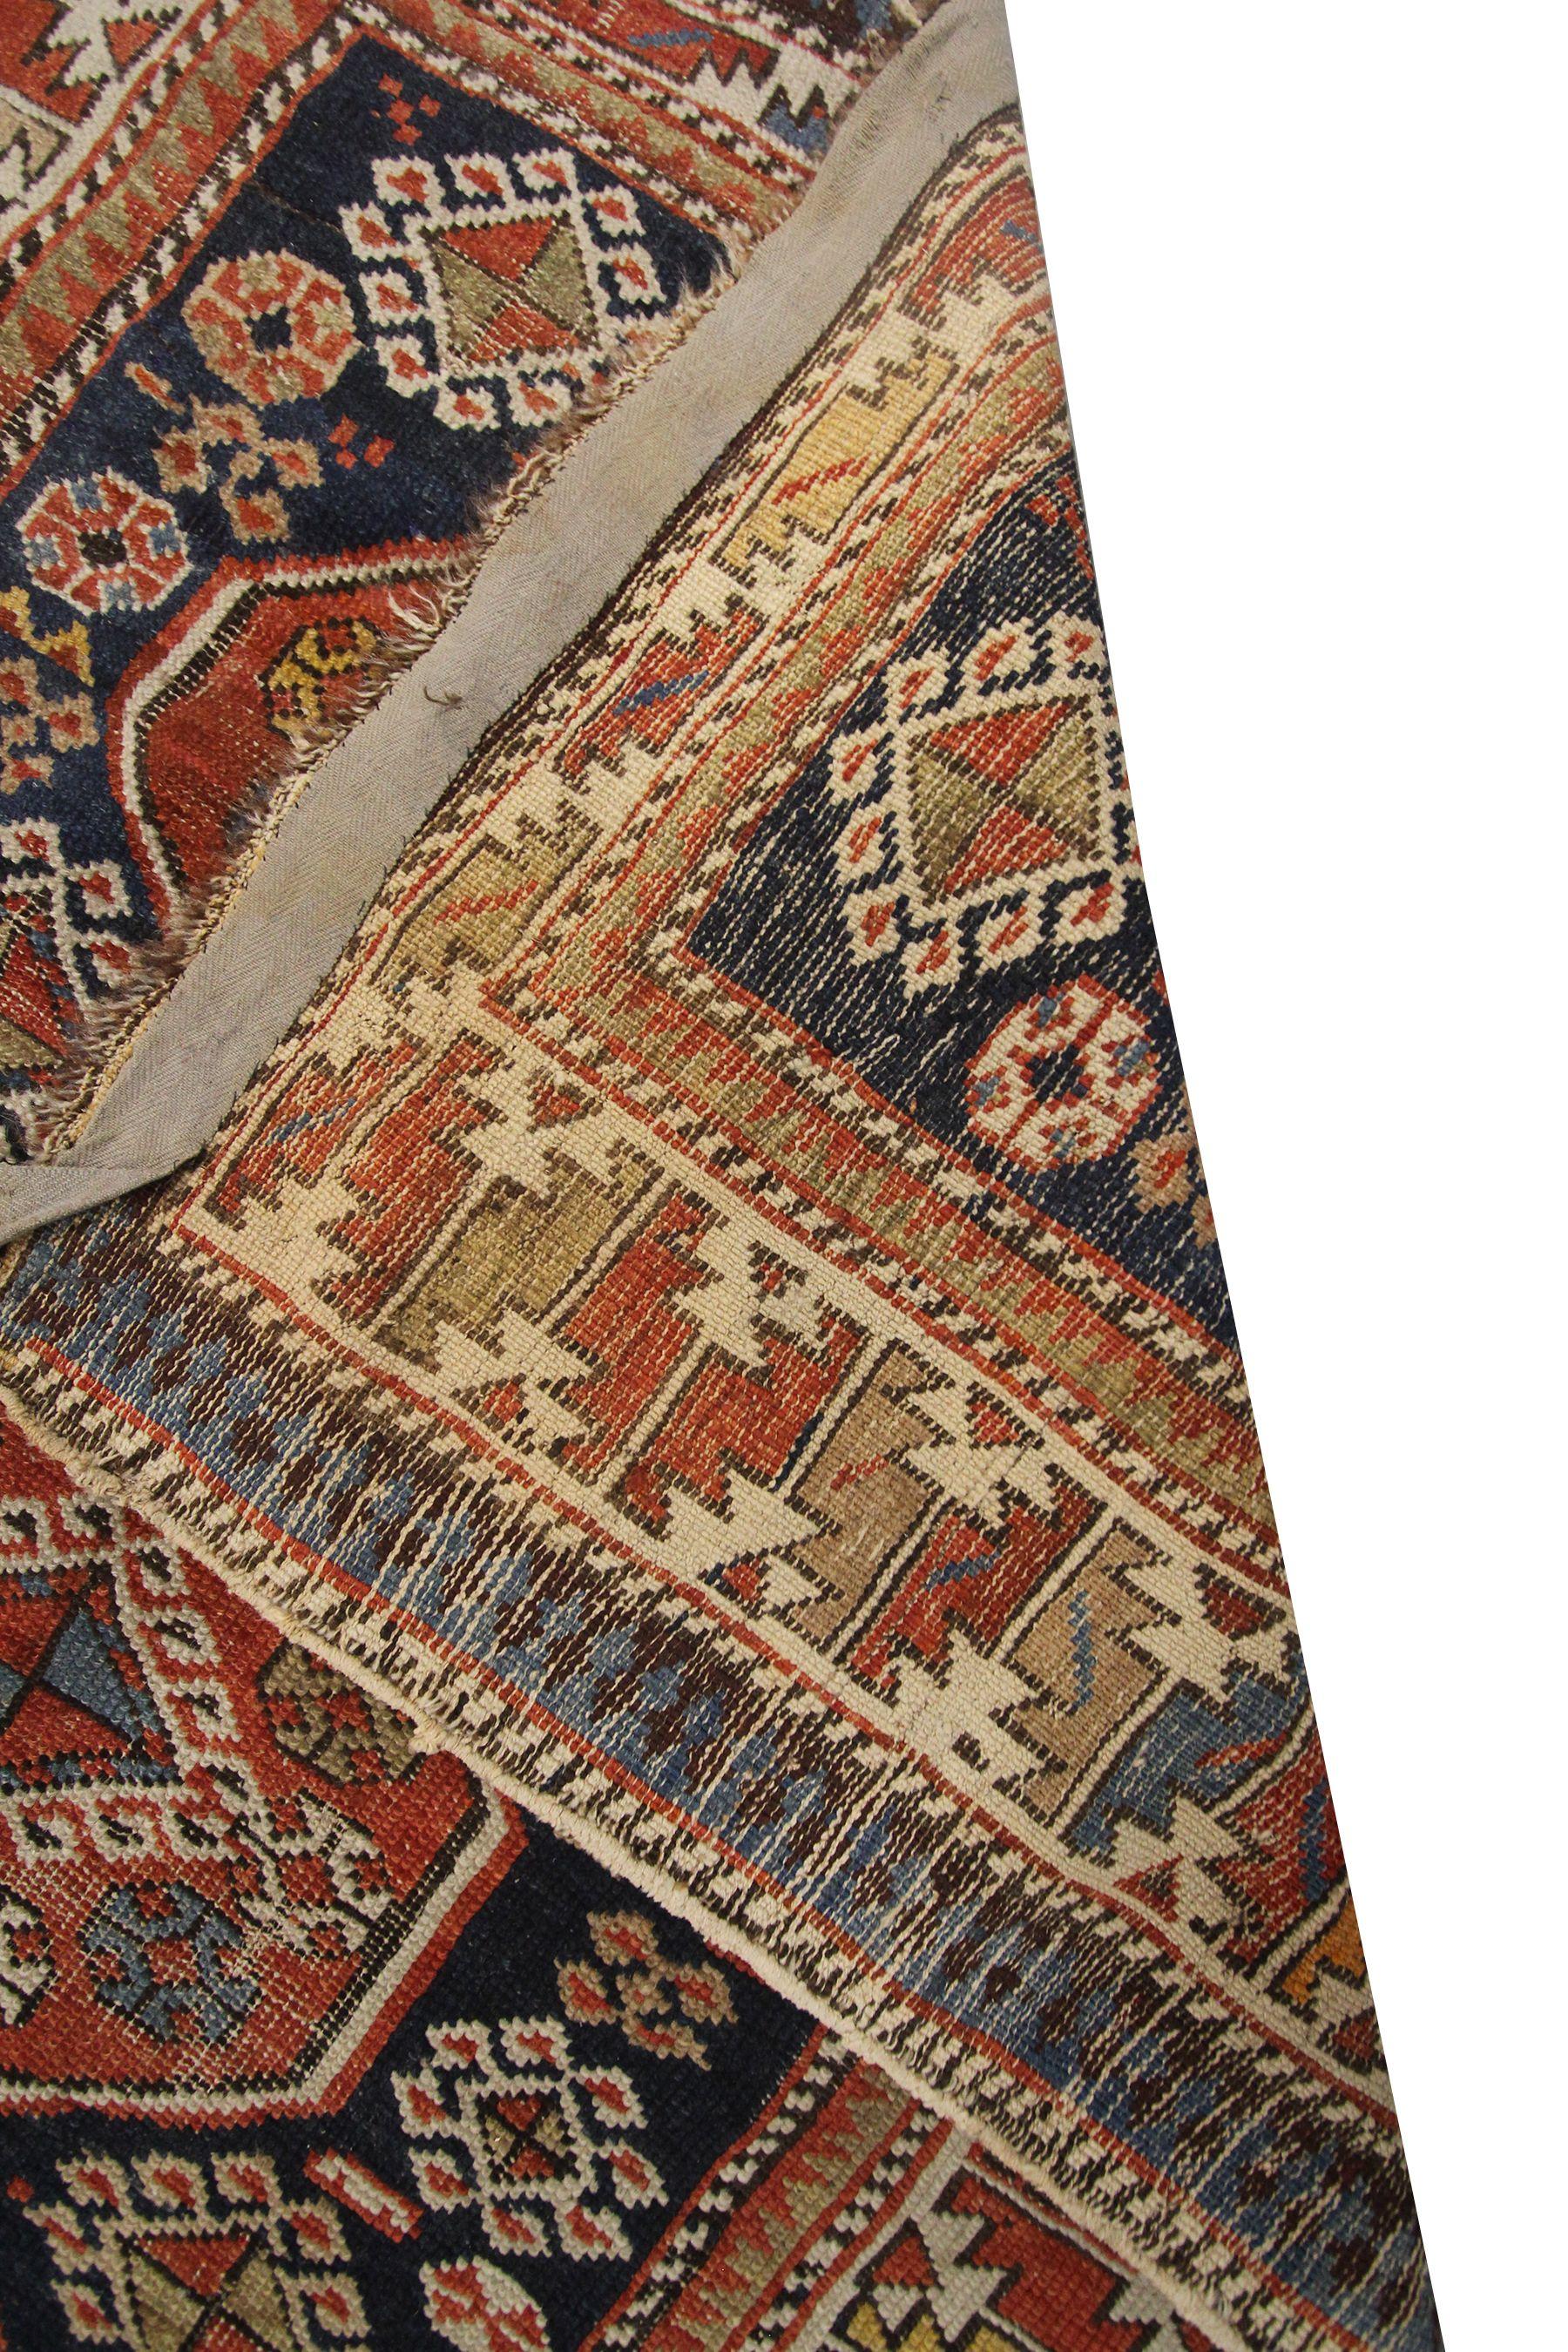 Pre-1900 Antique Shirvan Caucasian Rug Caucasian Shirvan Rug Wool Foundation In Good Condition For Sale In New York, NY